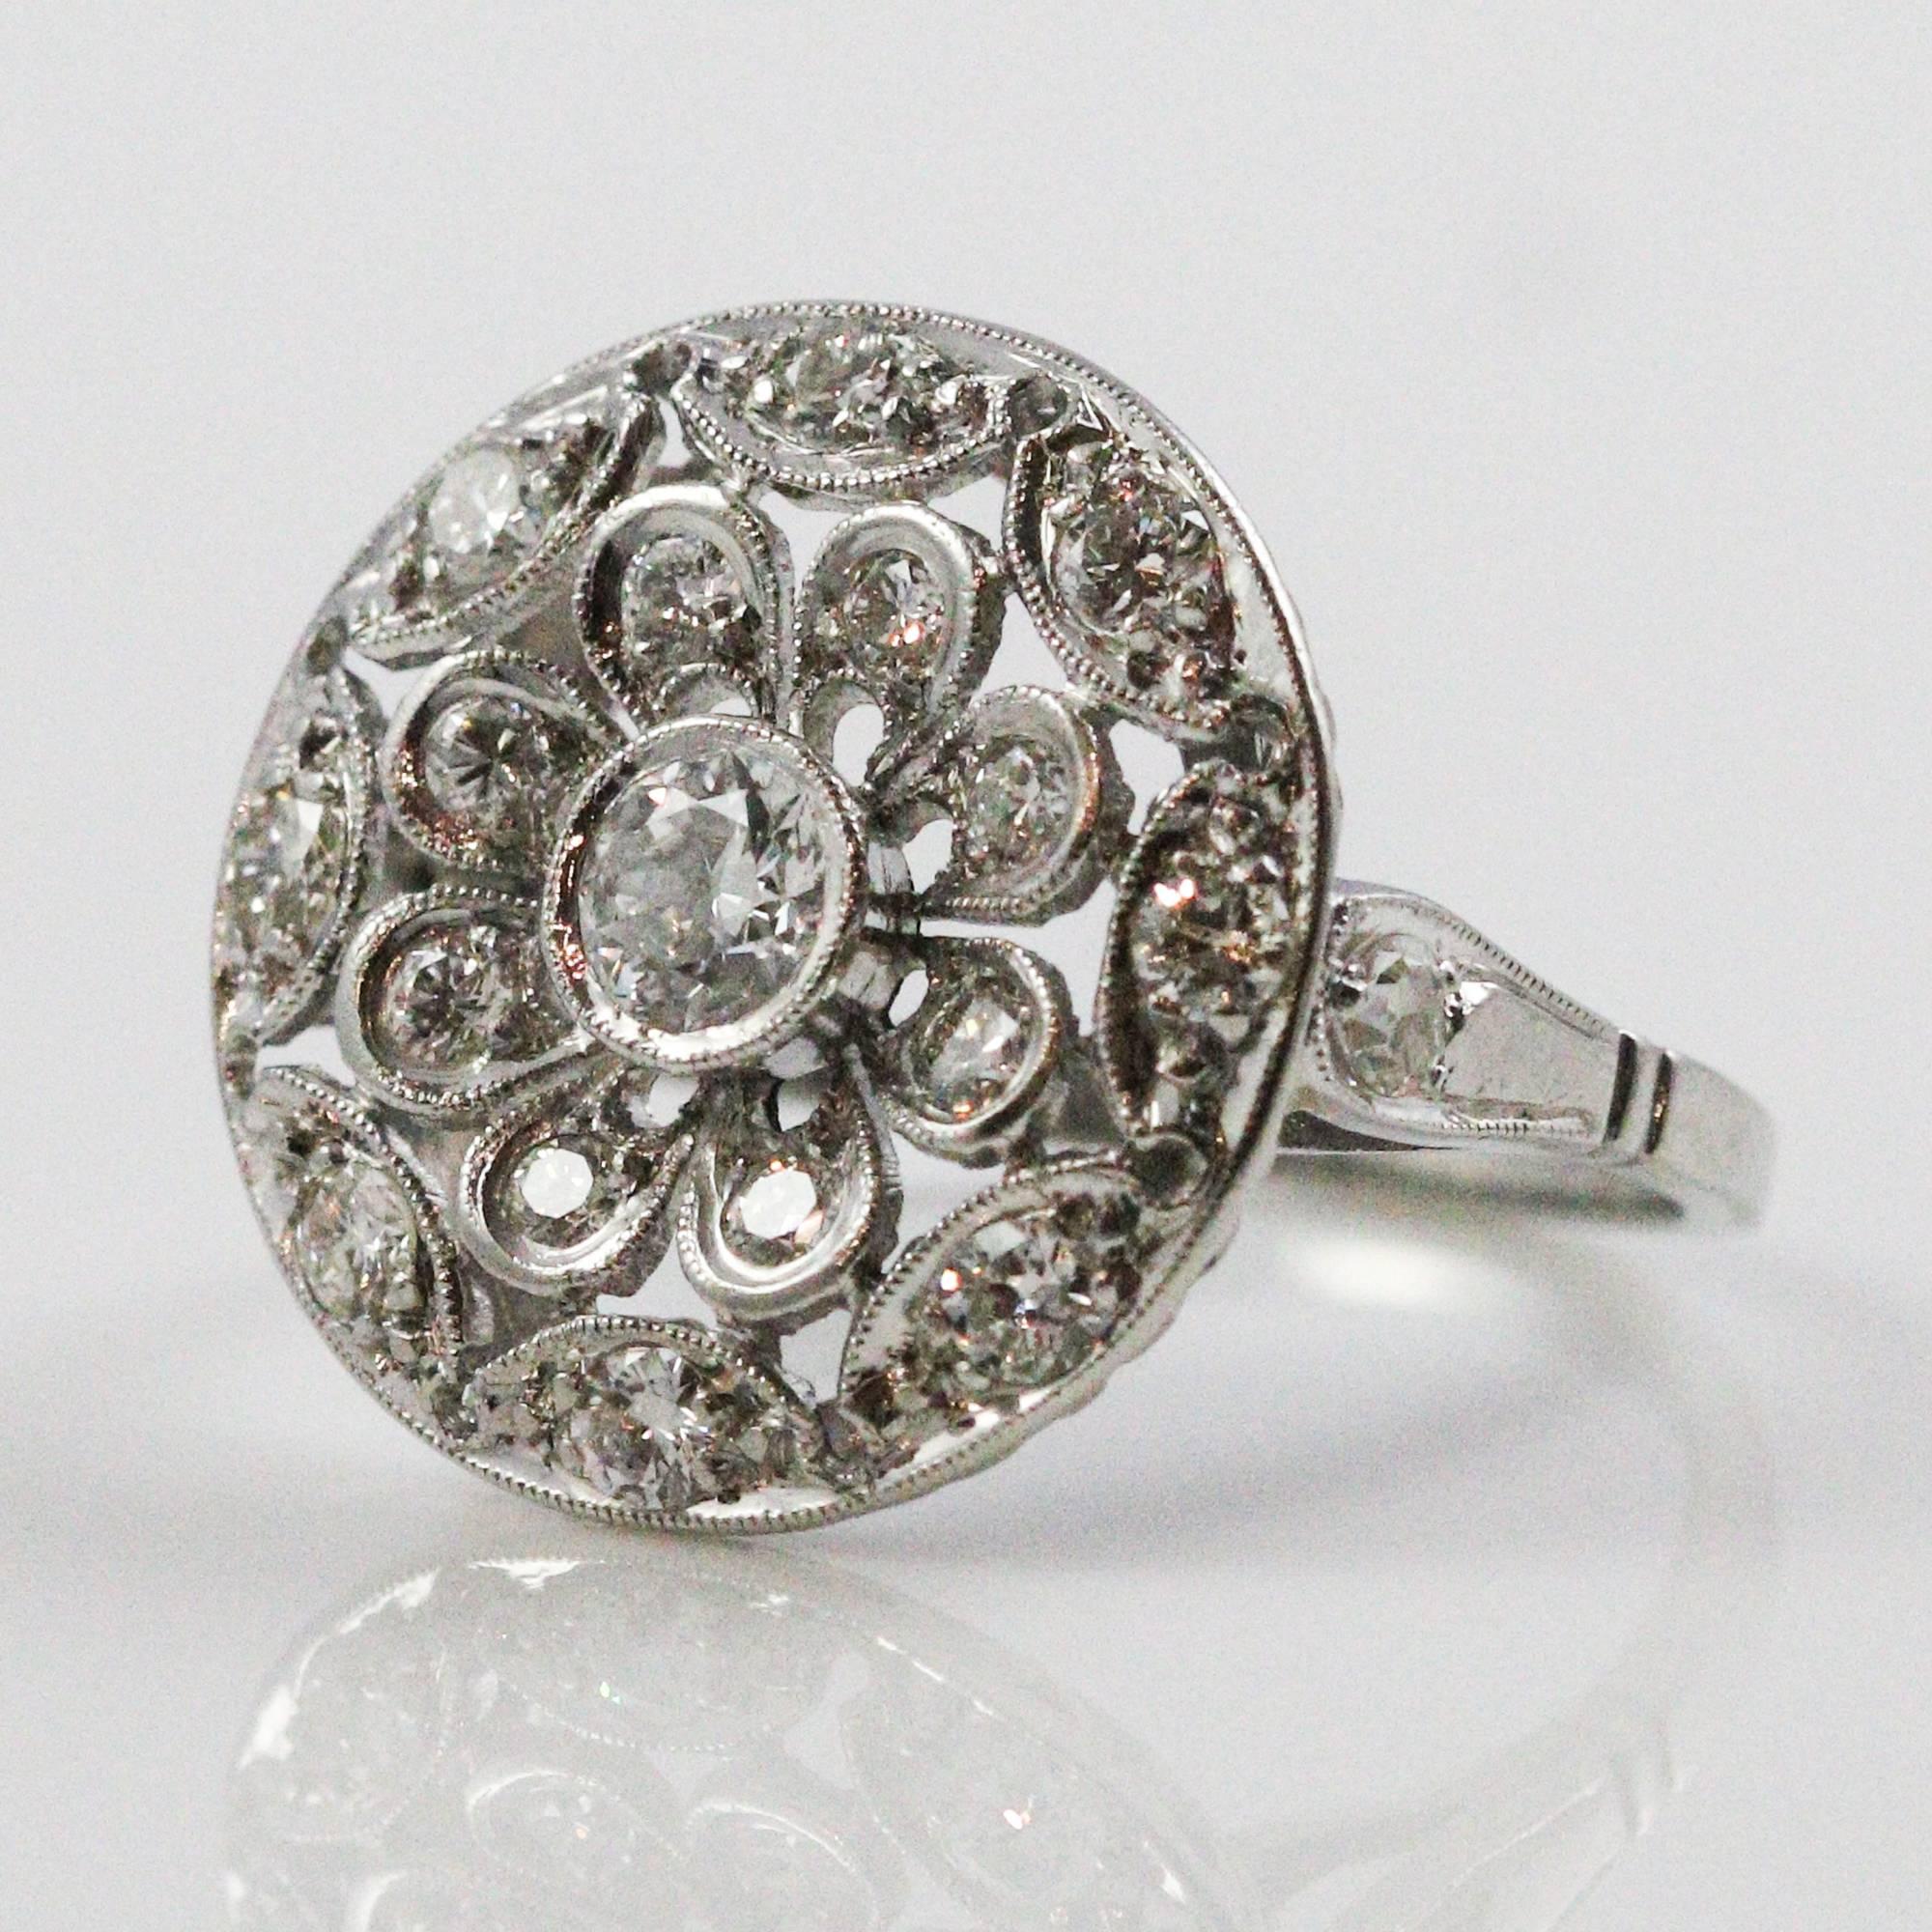 This gorgeous ring is the epitome of Art Deco design: elaborate, elegant, functional, feminine and bold. It is made in platinum with a center European cut diamond weighing approximately 0.26ctw and grading as 